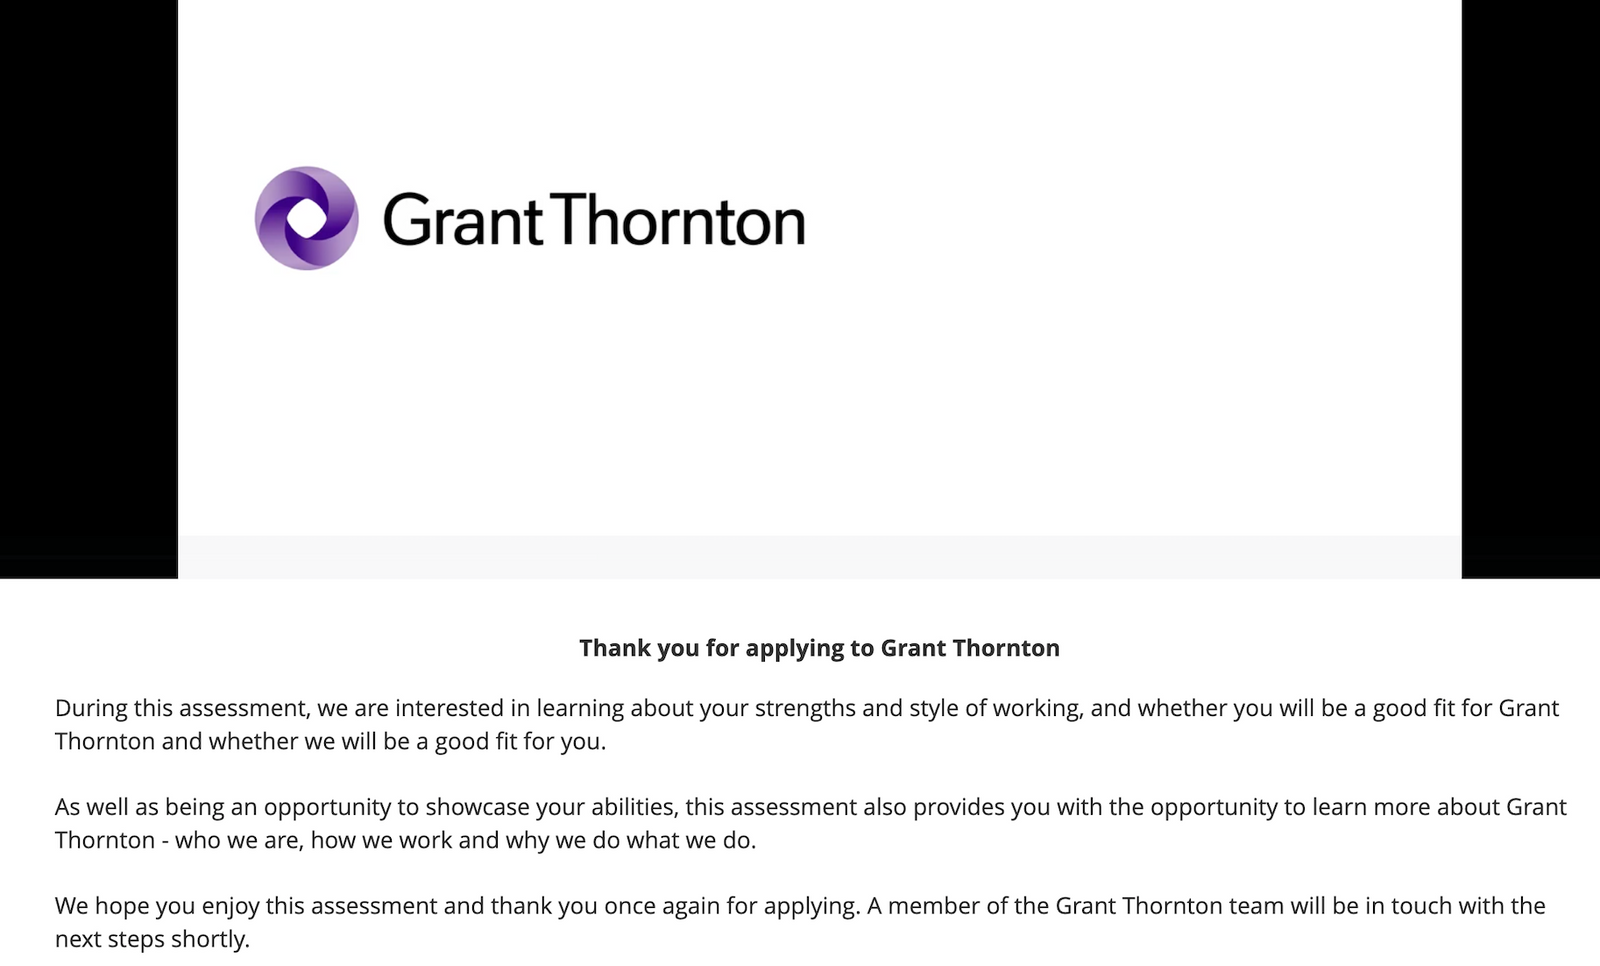 Grant Thornton Strengths Assessment PRACTICE Free Questions